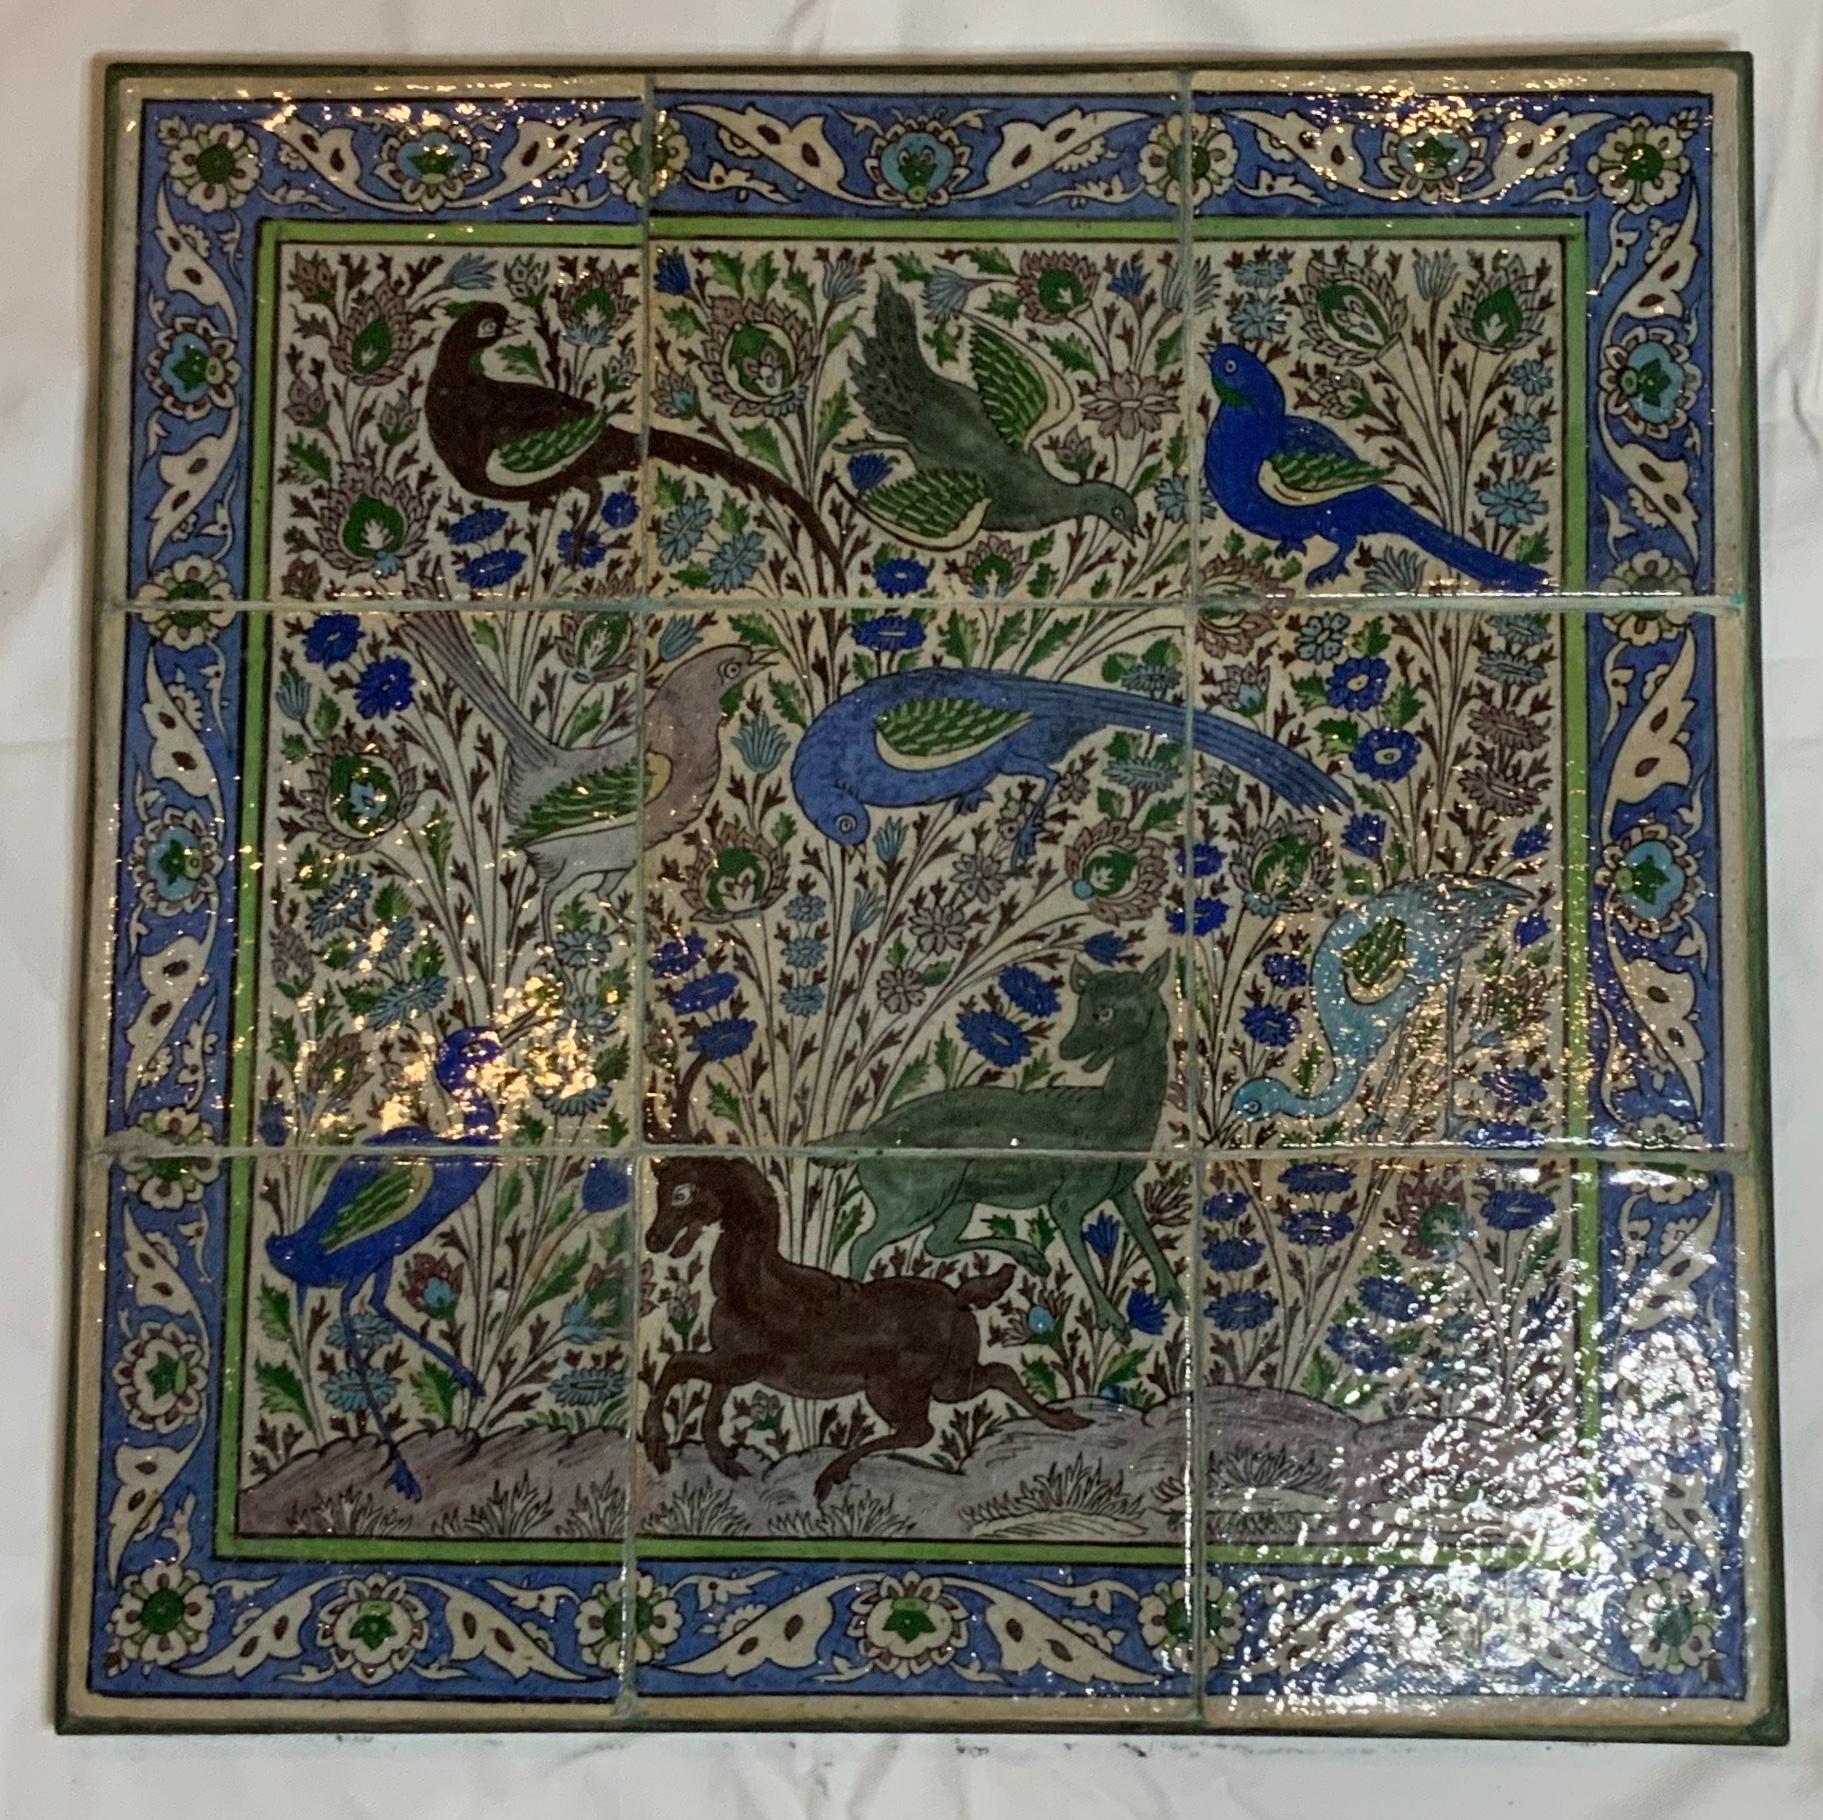 Beautiful set of nine tiles made of hand painted and glazed ceramic, embedded in professionally custom made steel frame. The tiles are painted with birds and animals motifs and floral and vine in the background. Exceptional blue border. One of a